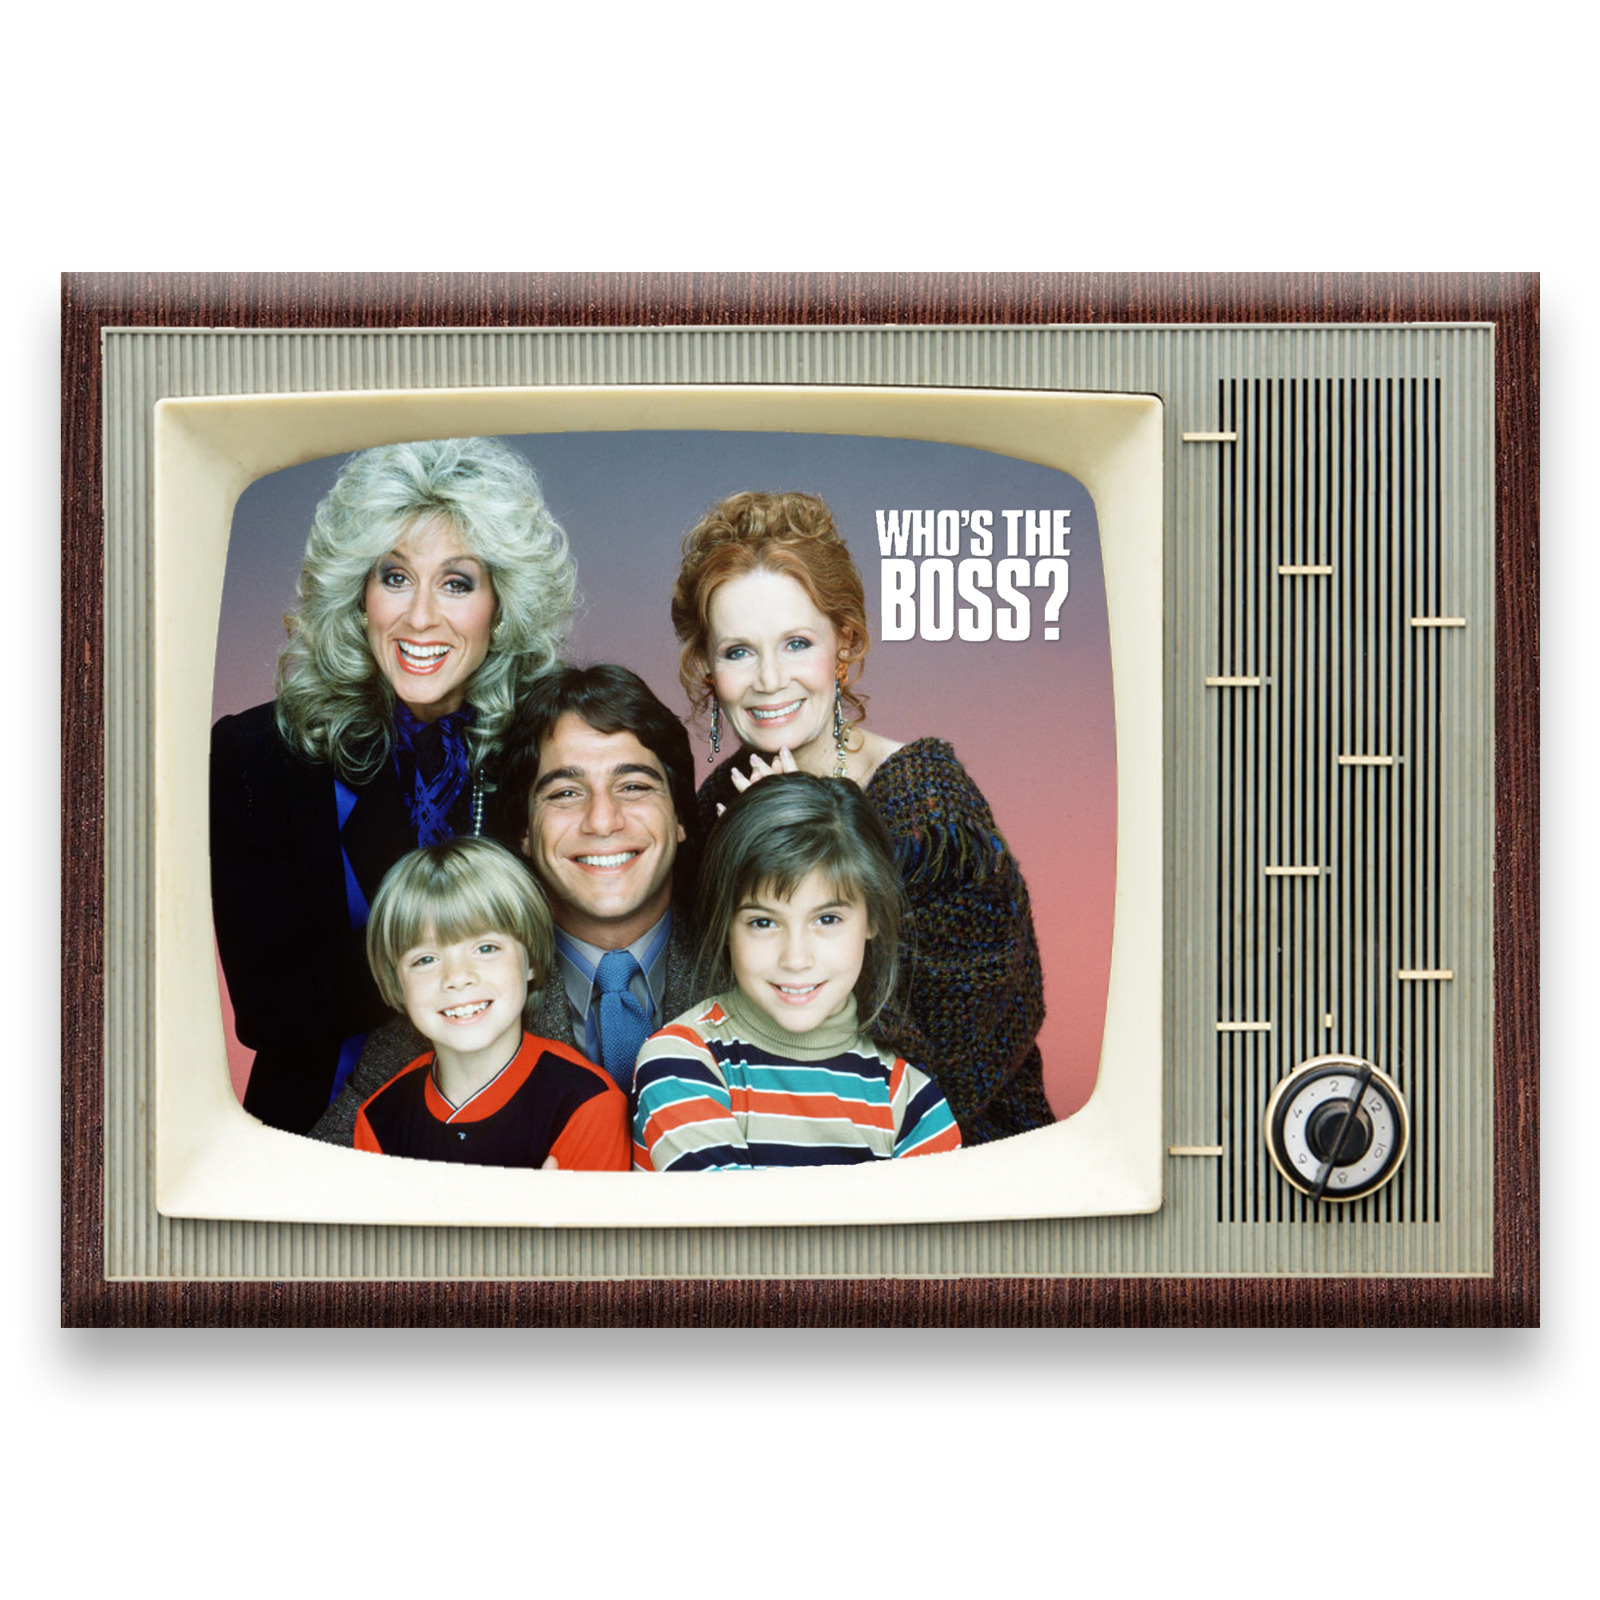 WHO'S THE BOSS? TV Show Retro TV 3.5 inches x 2.5 inches FRIDGE MAGNET